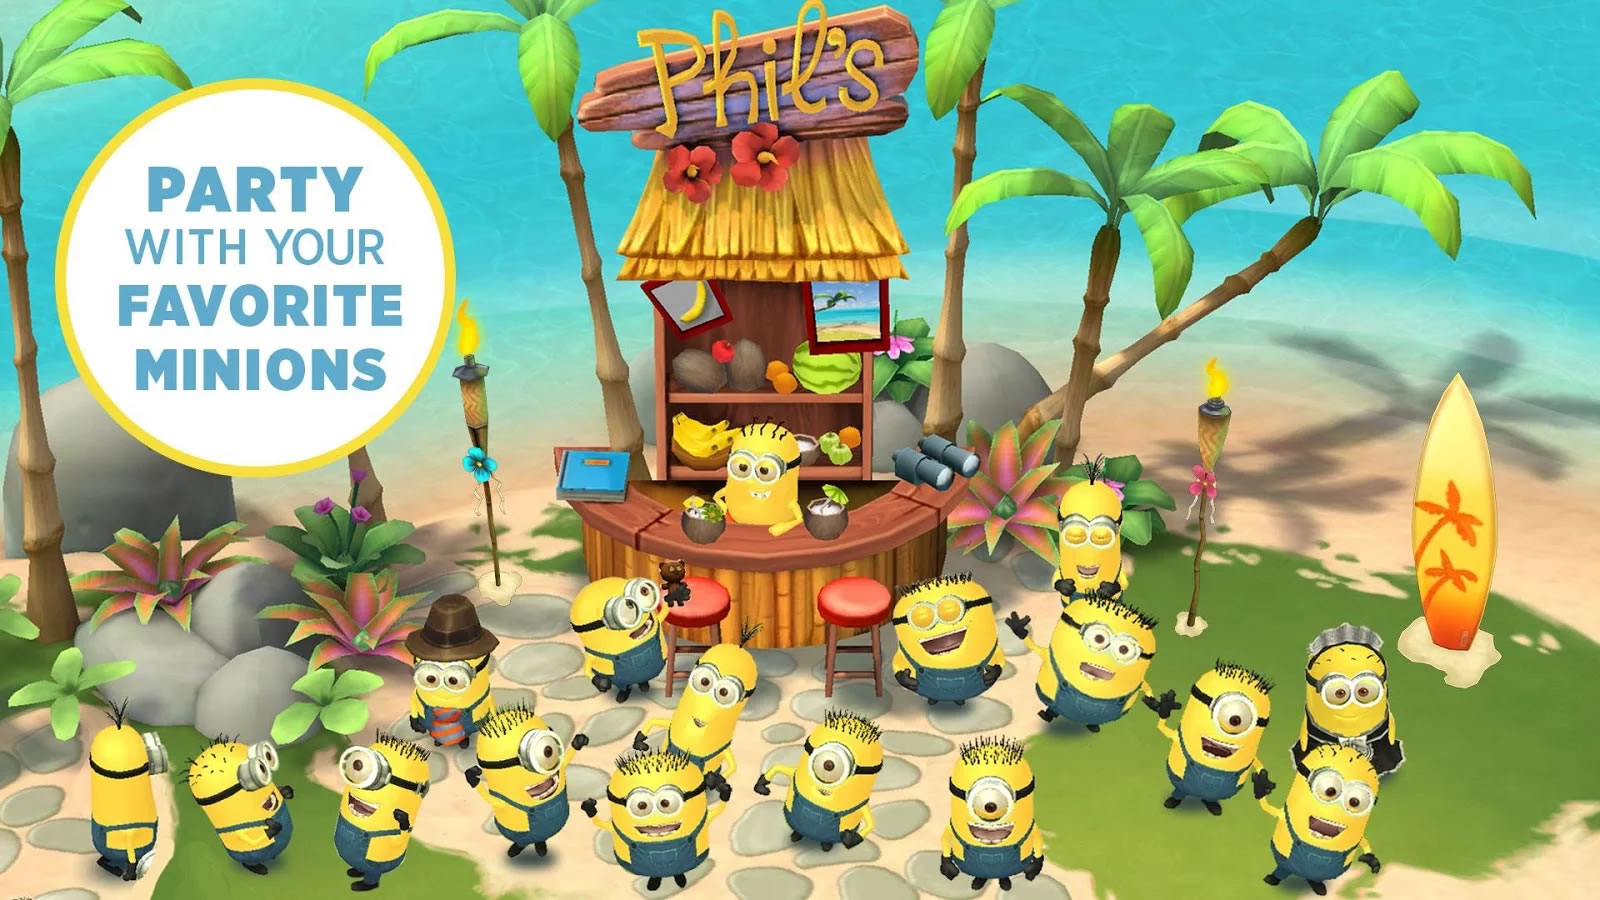 Party With The Minions! We're Social and FUN! Follow Us! 